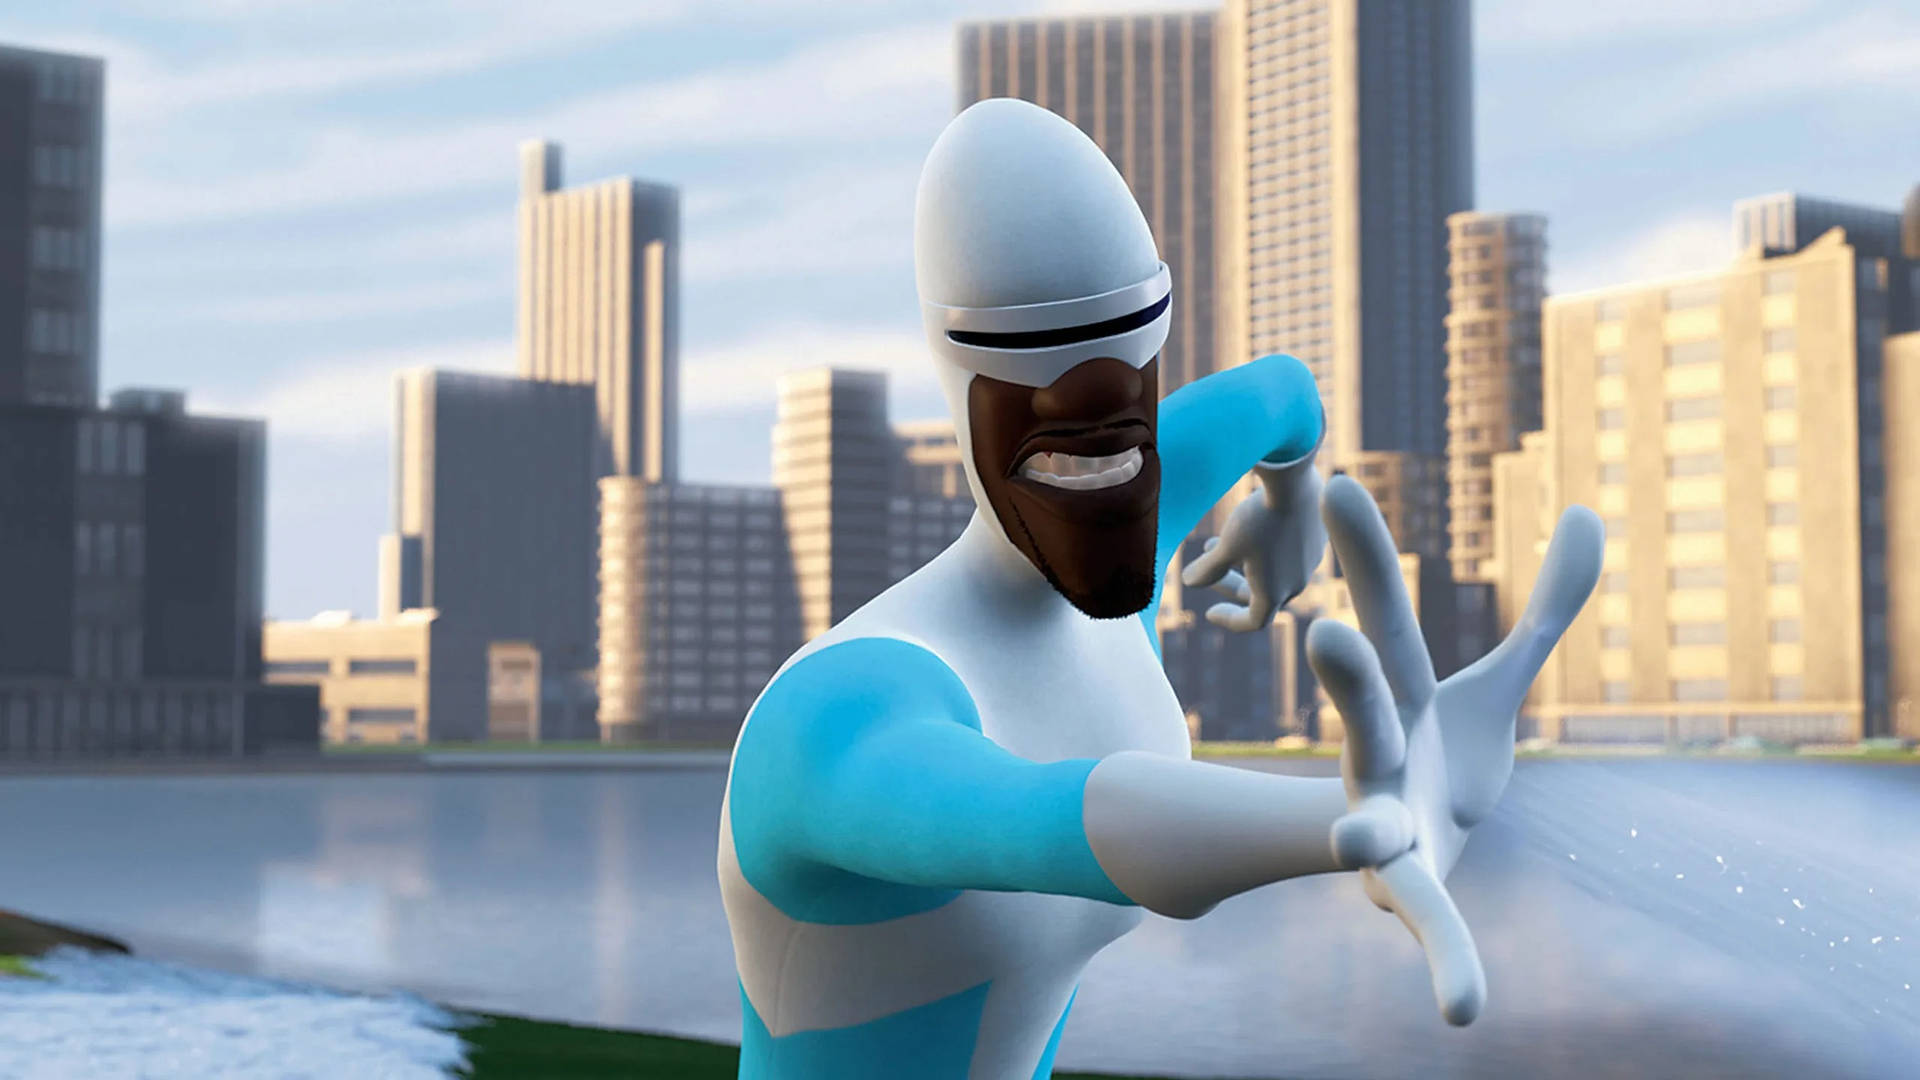 Heroic Frozone In The City